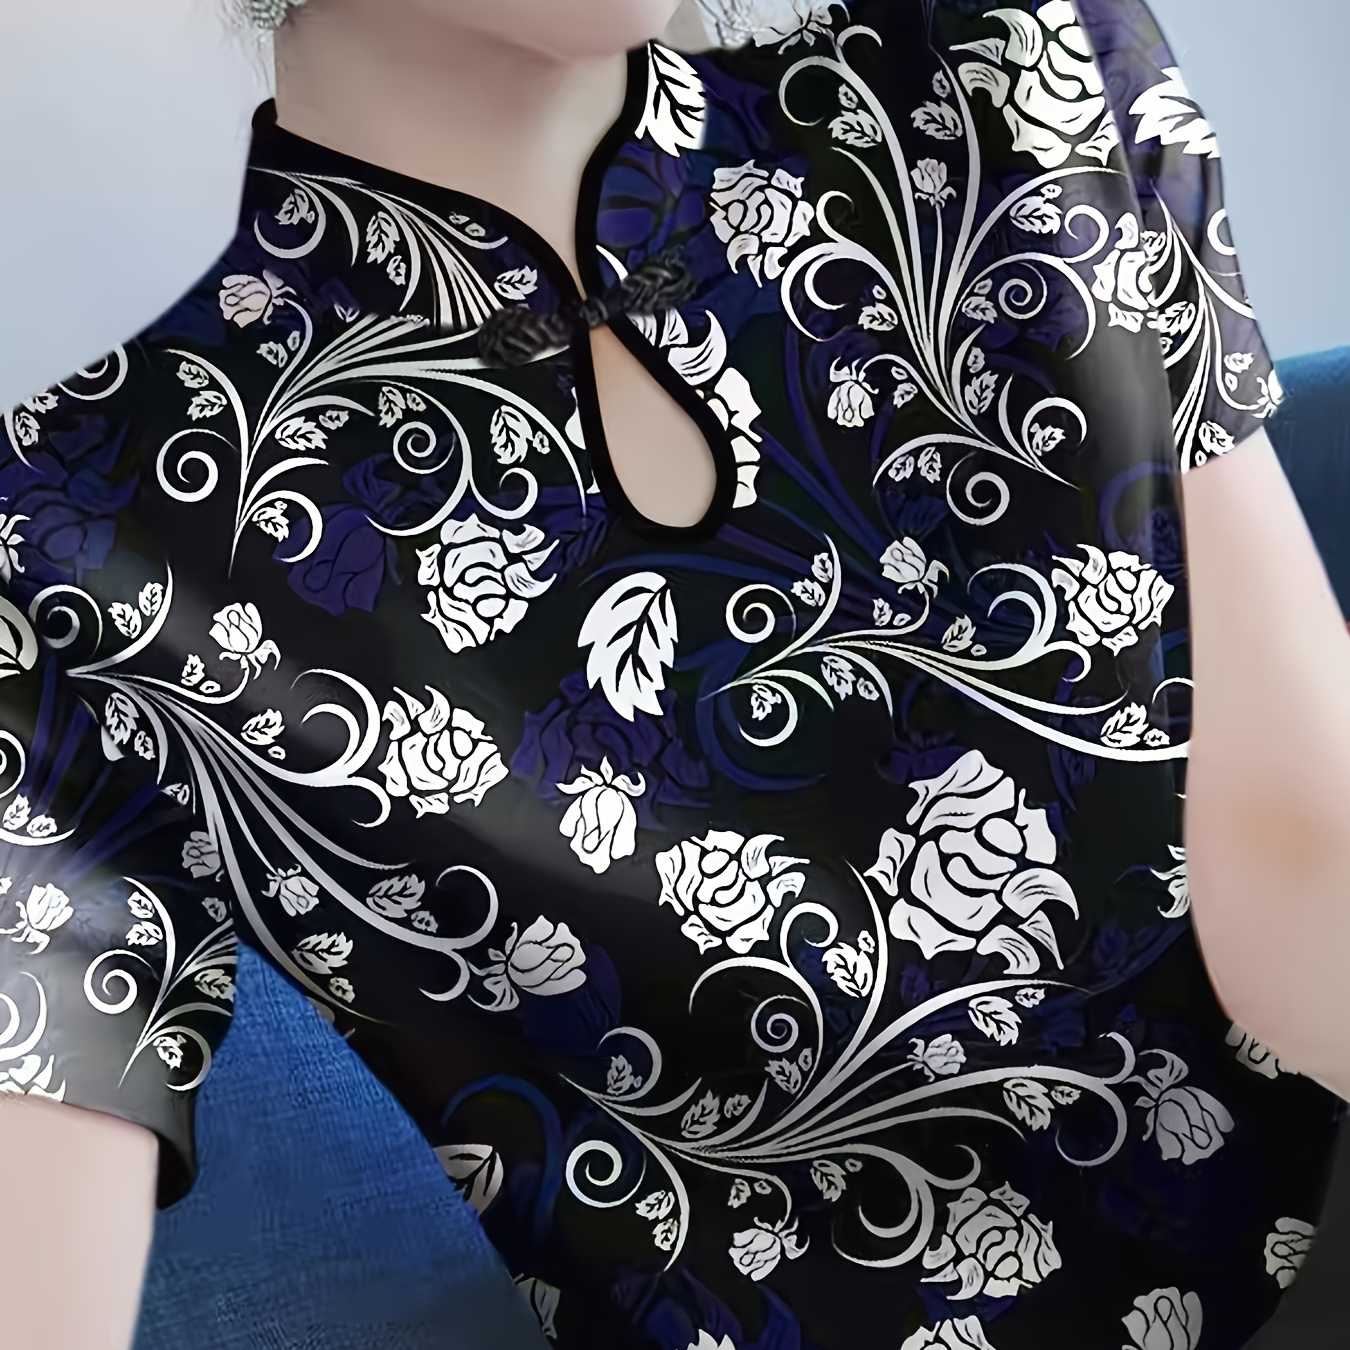 

Floral Print Frog Button Blouse, Vintage Collar Short Sleeve Tang Top, Women's Clothing